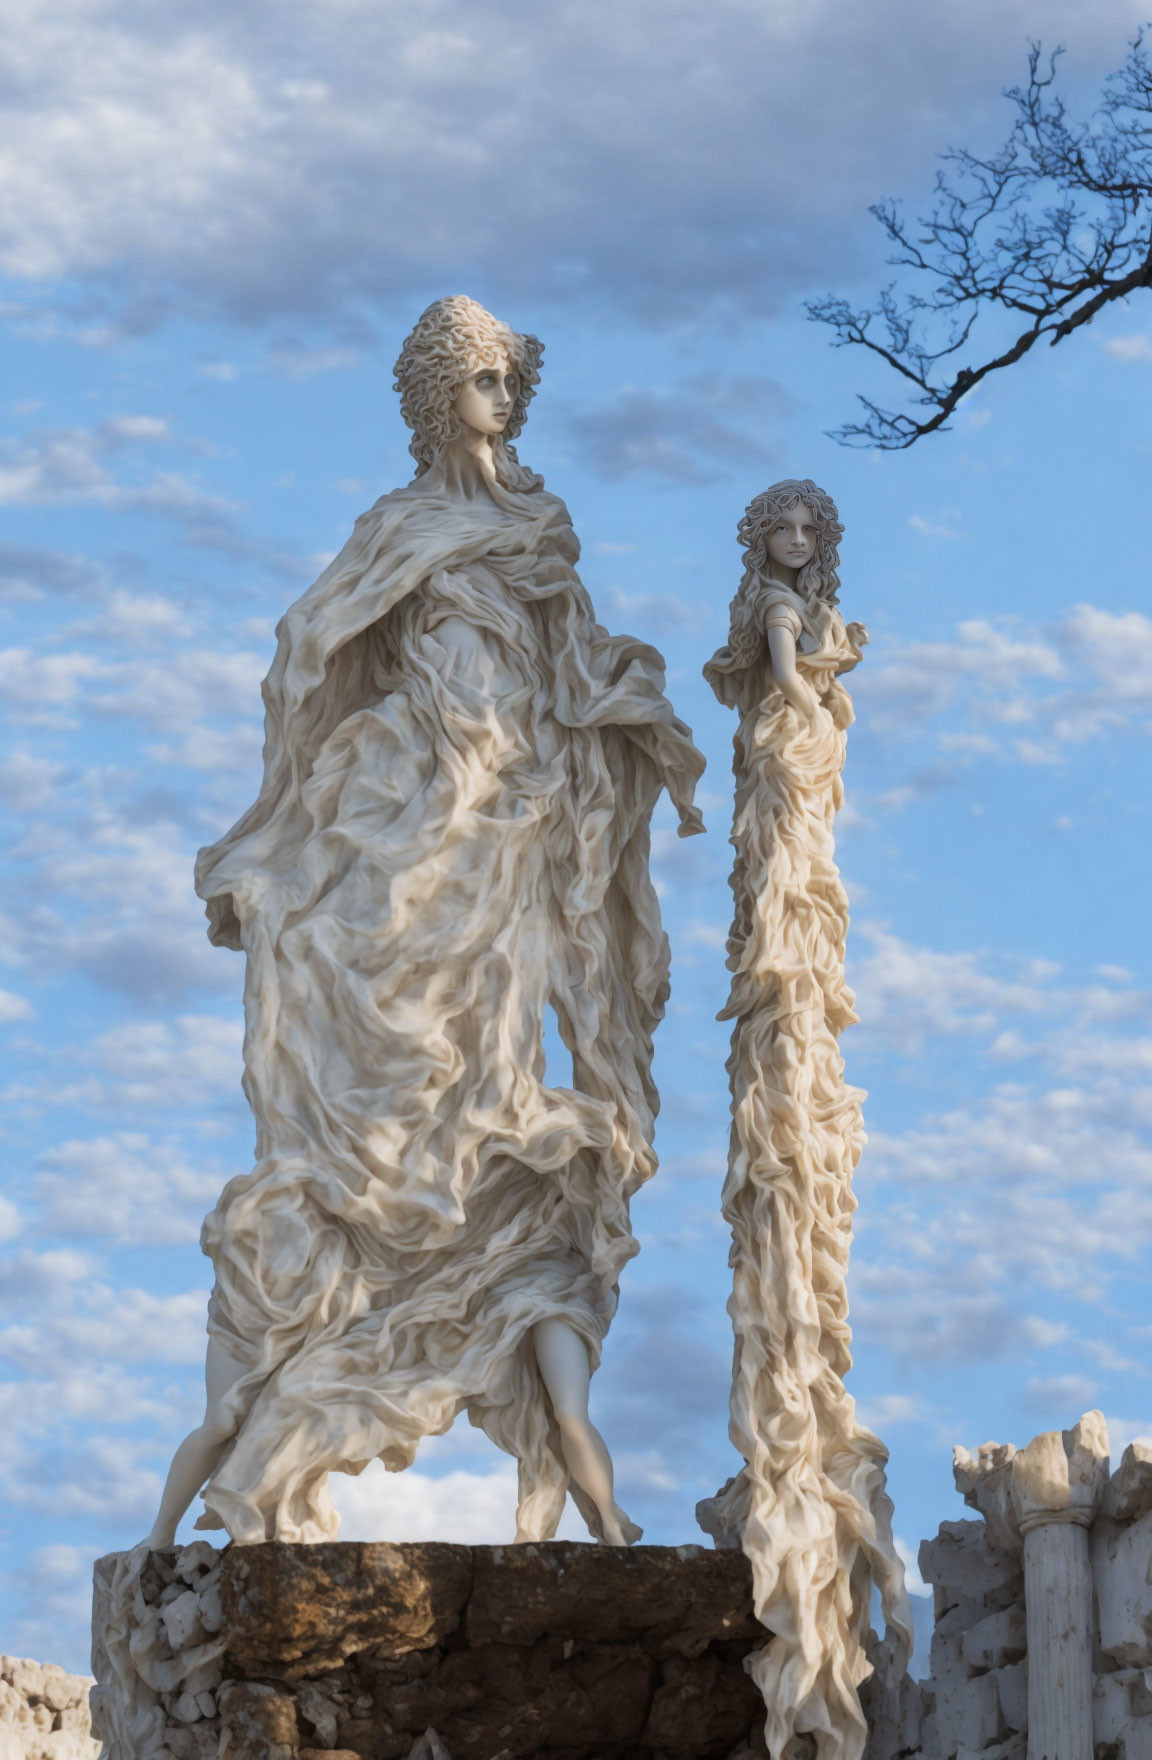 Two white sculptures of female figures in flowing robes under a blue sky with wispy clouds and a leaf